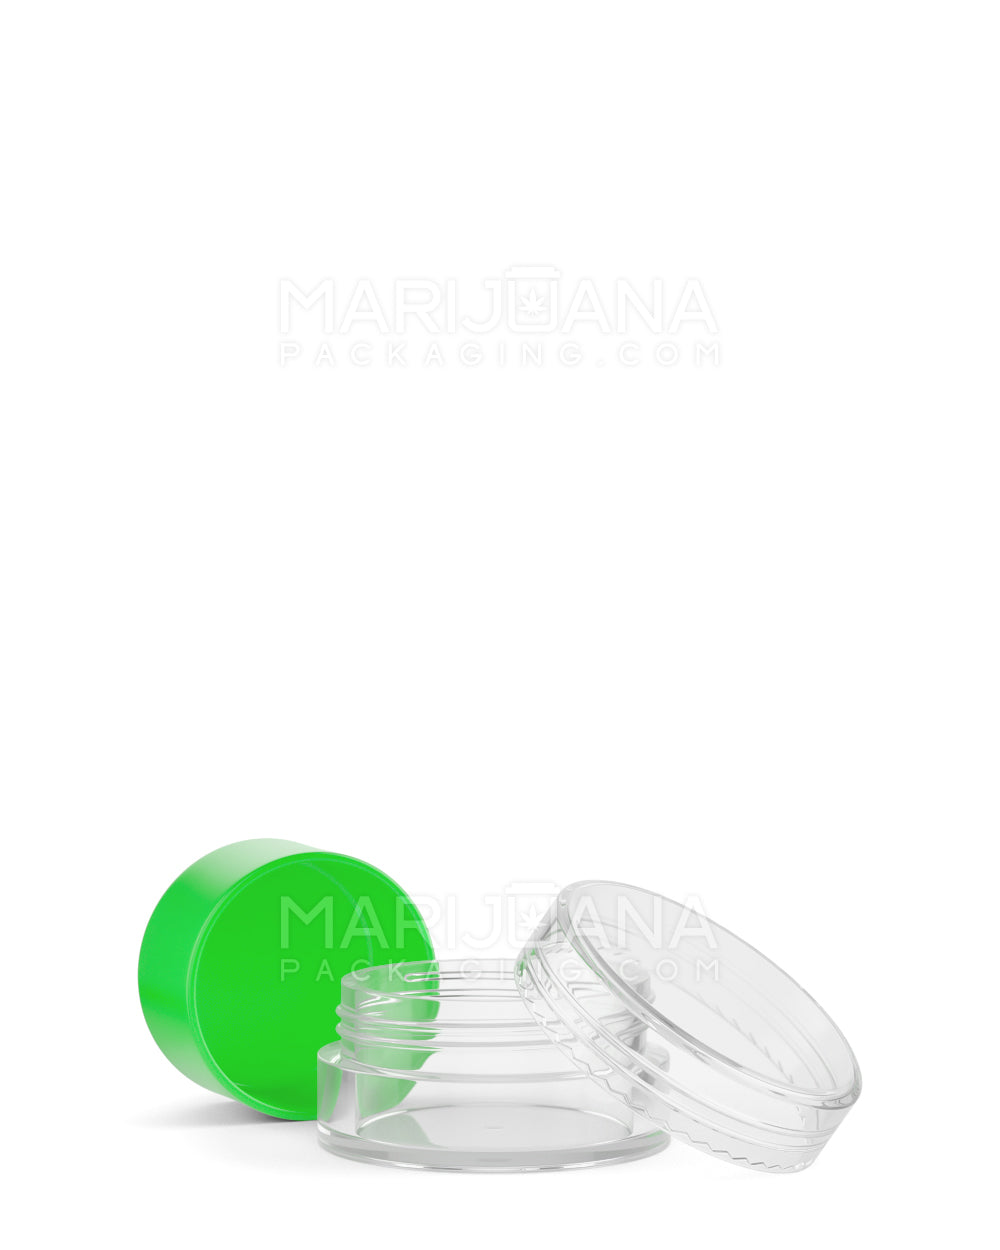 Clear Concentrate Containers w/ Screw Top Cap & Green Silicone Insert | 5mL - Plastic | Sample - 4